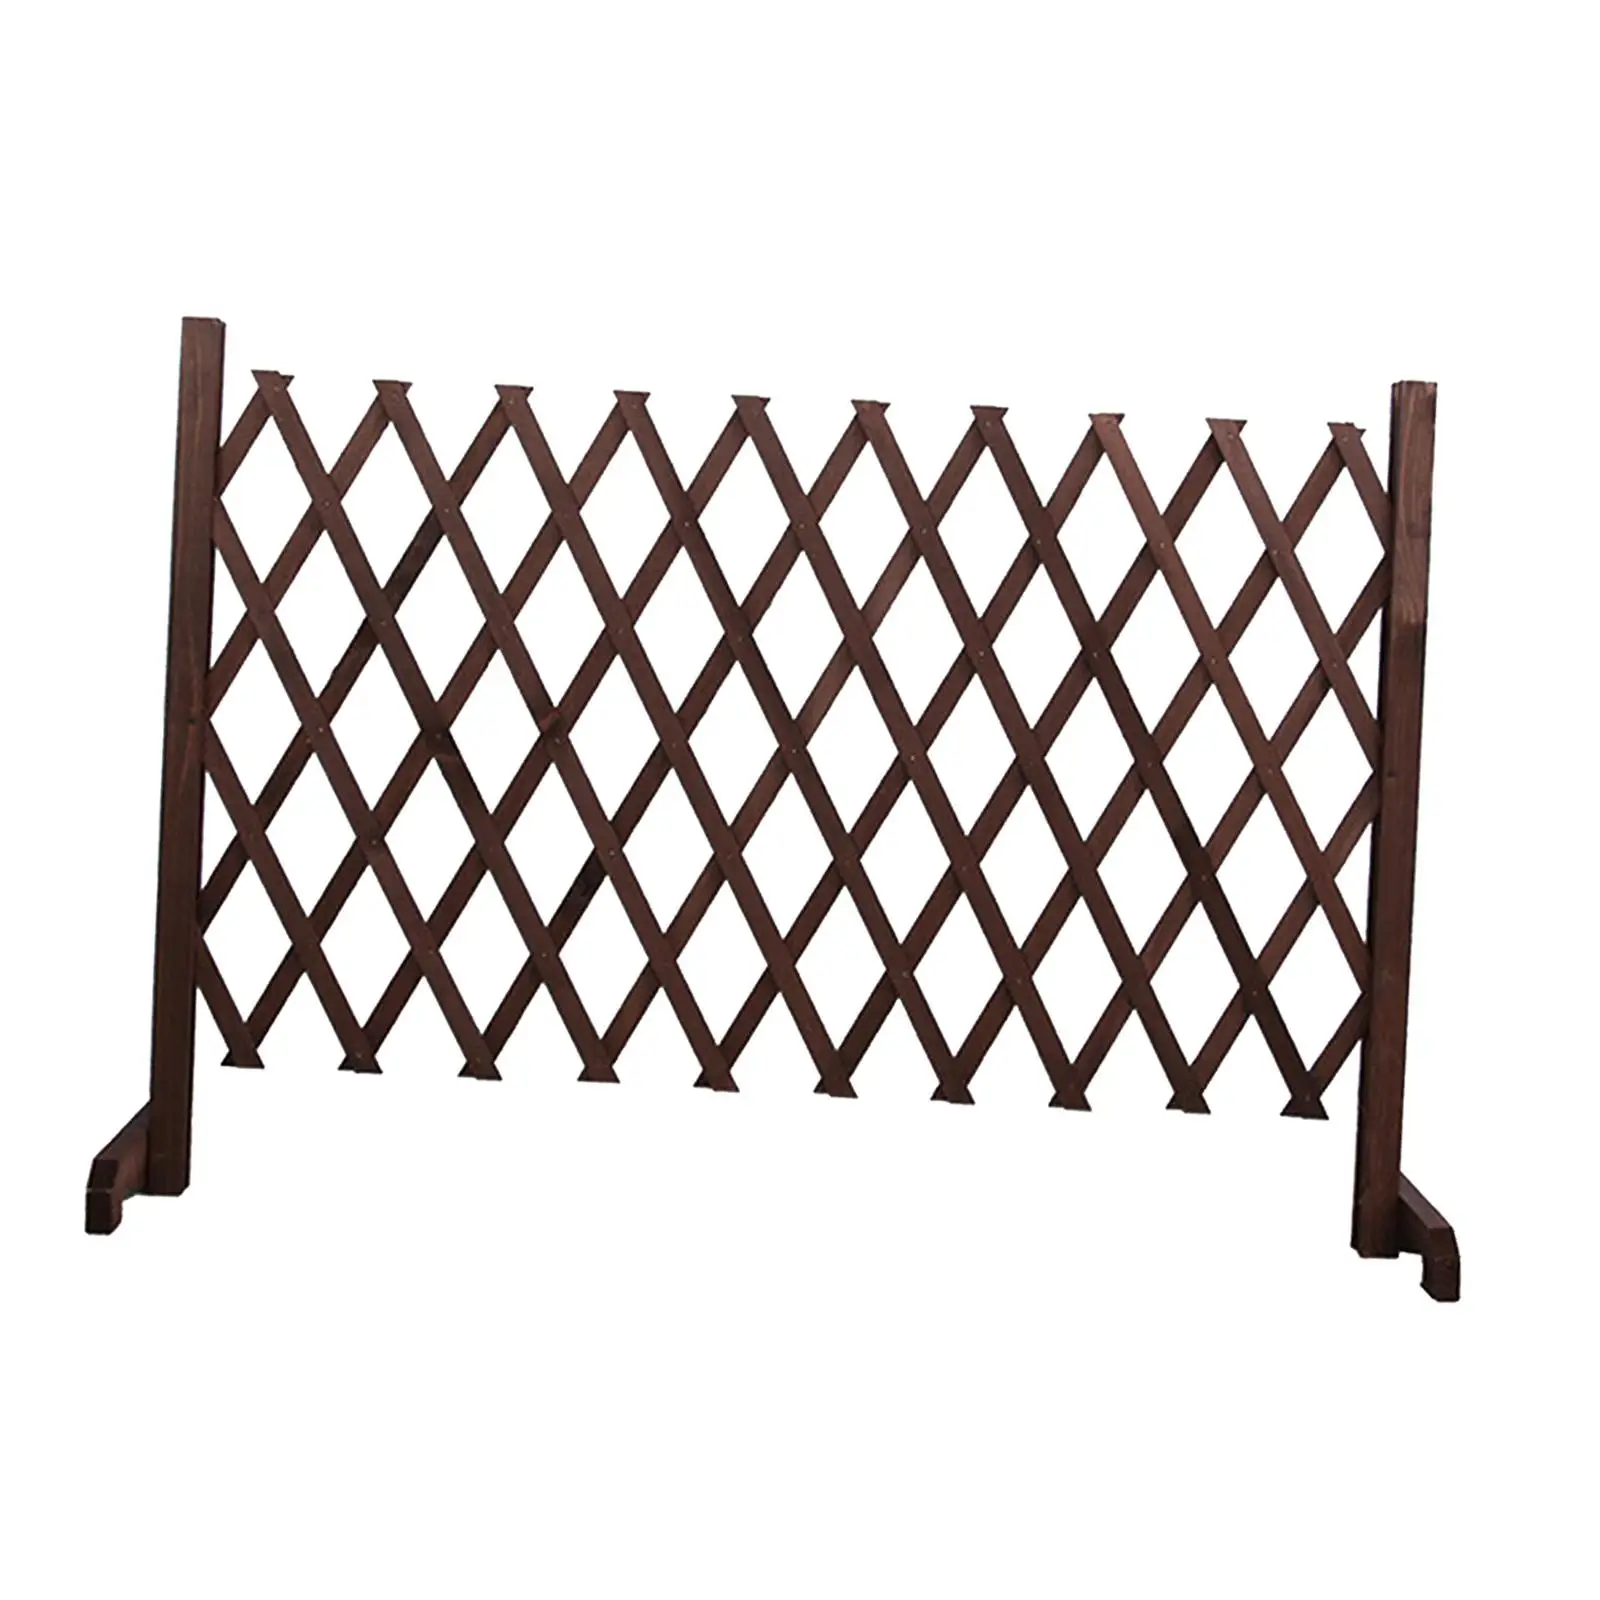 Freestanding Wooden Dog Gate Expanding Pet Isolation Gate Screen Door Pet Fence for Stairways